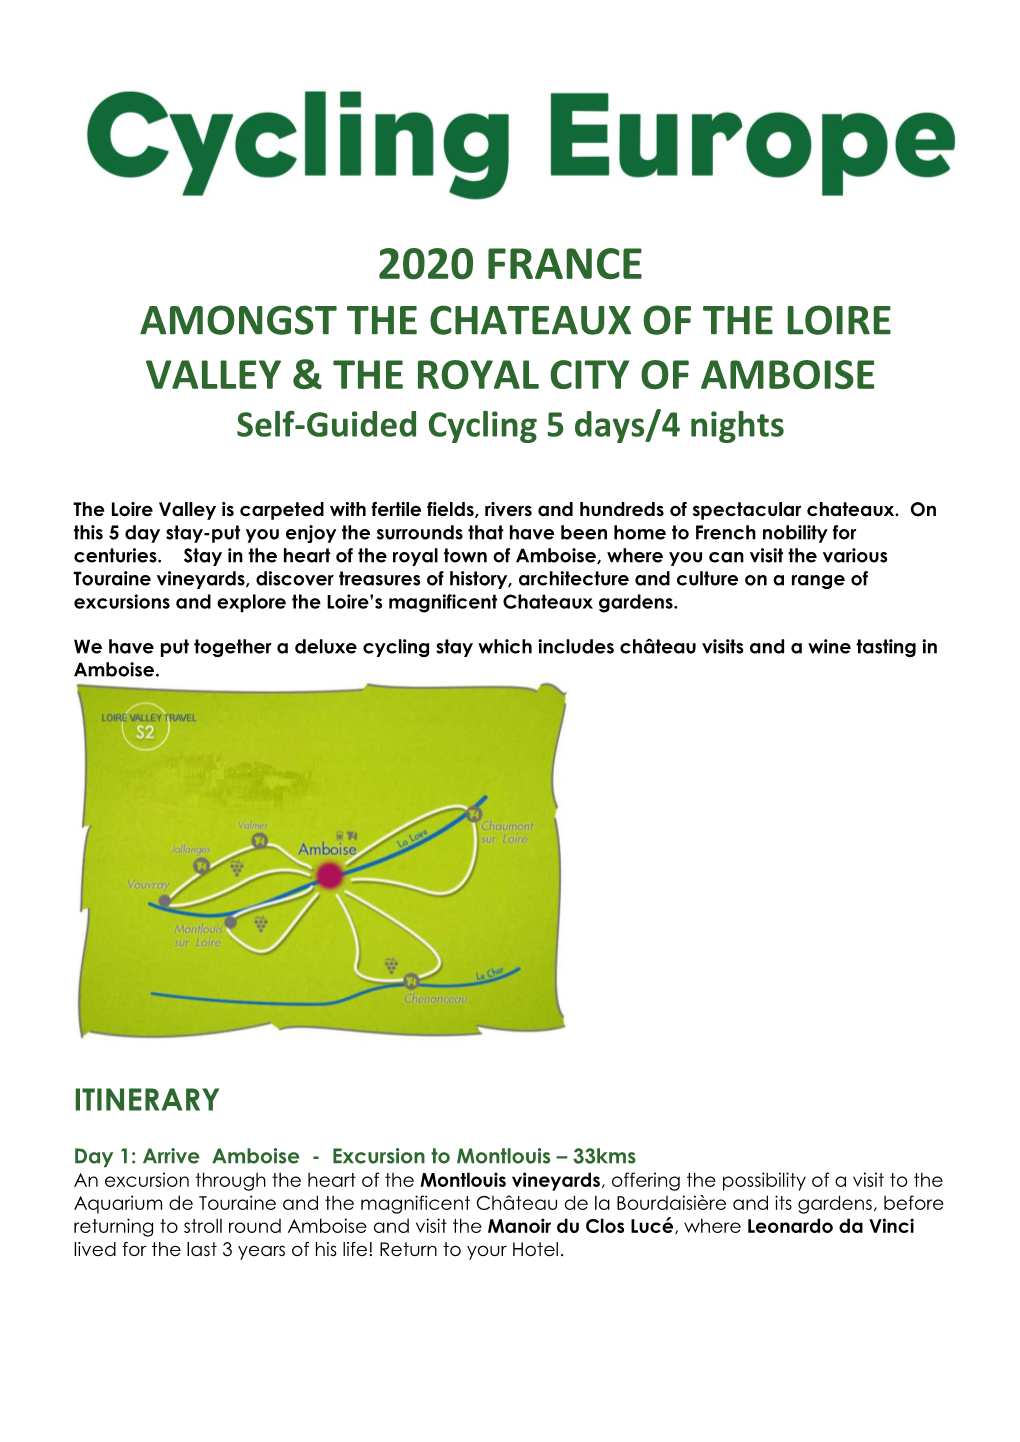 2020 FRANCE AMONGST the CHATEAUX of the LOIRE VALLEY & the ROYAL CITY of AMBOISE Self-Guided Cycling 5 Days/4 Nights